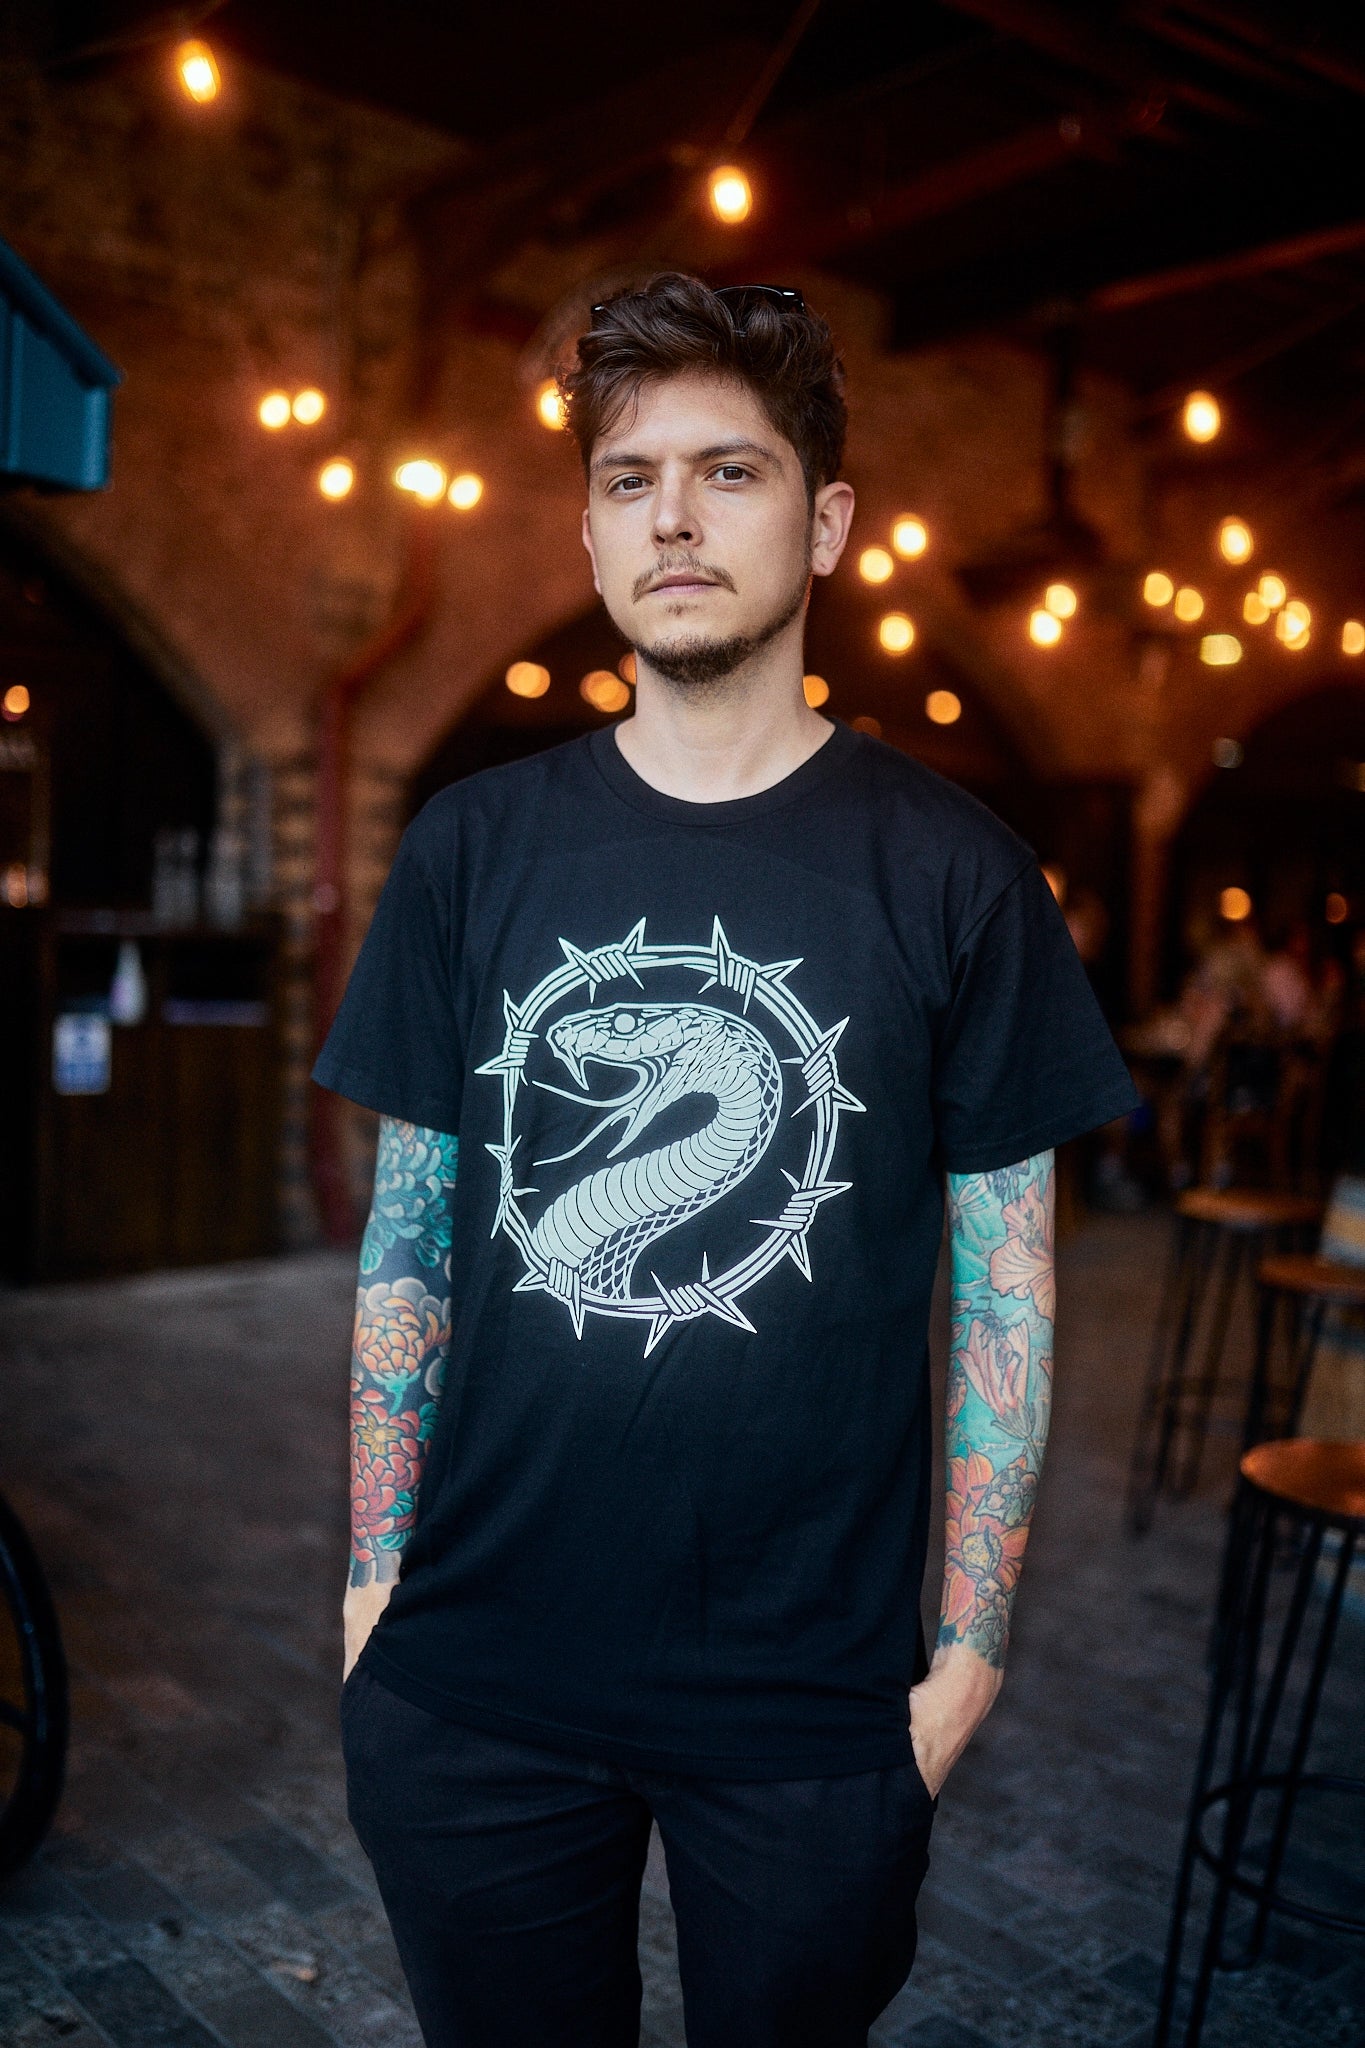 Barber wire serpent t-shirt by Joao Bosco